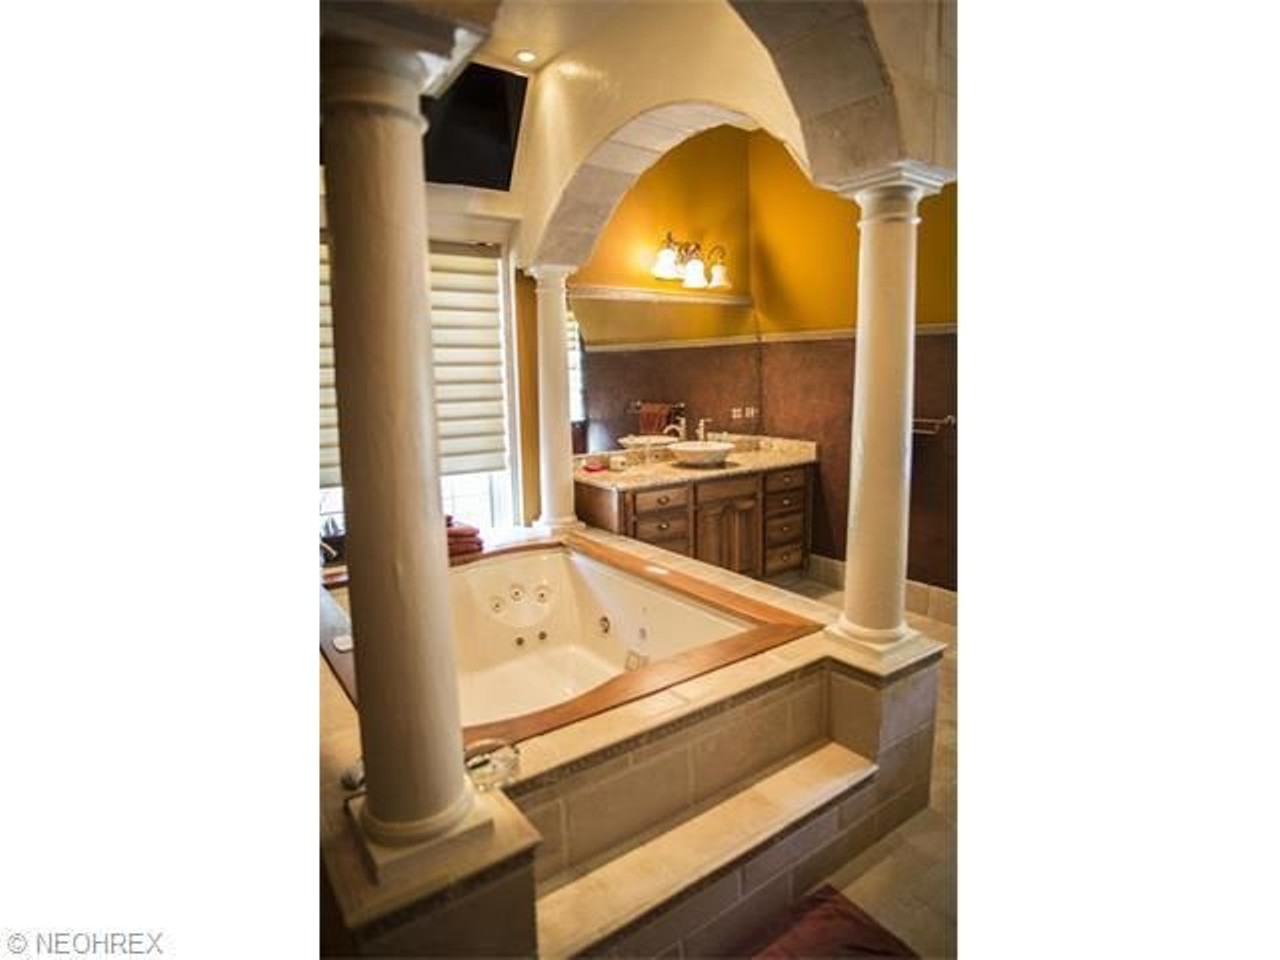 These columns in the master bath are kind of weird, but the Jacuzzi pool looks nice.